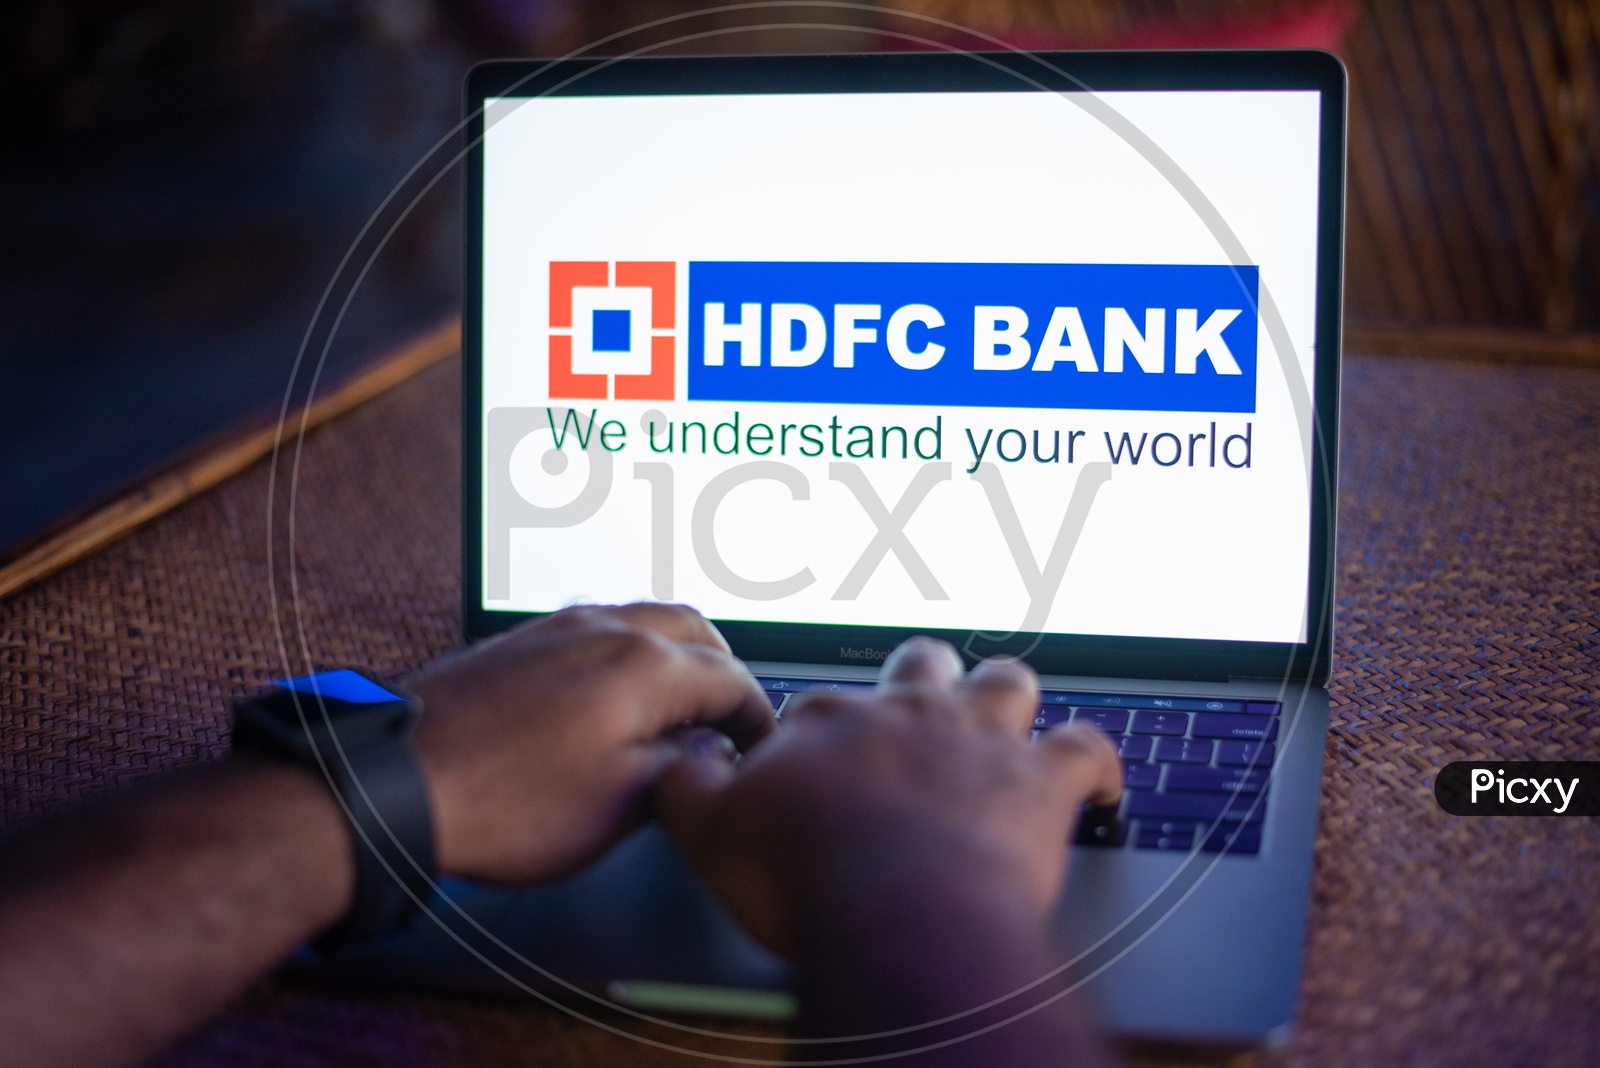 Indian Youth Accessing Online Banking Of  HDFC  BANK  in Laptop